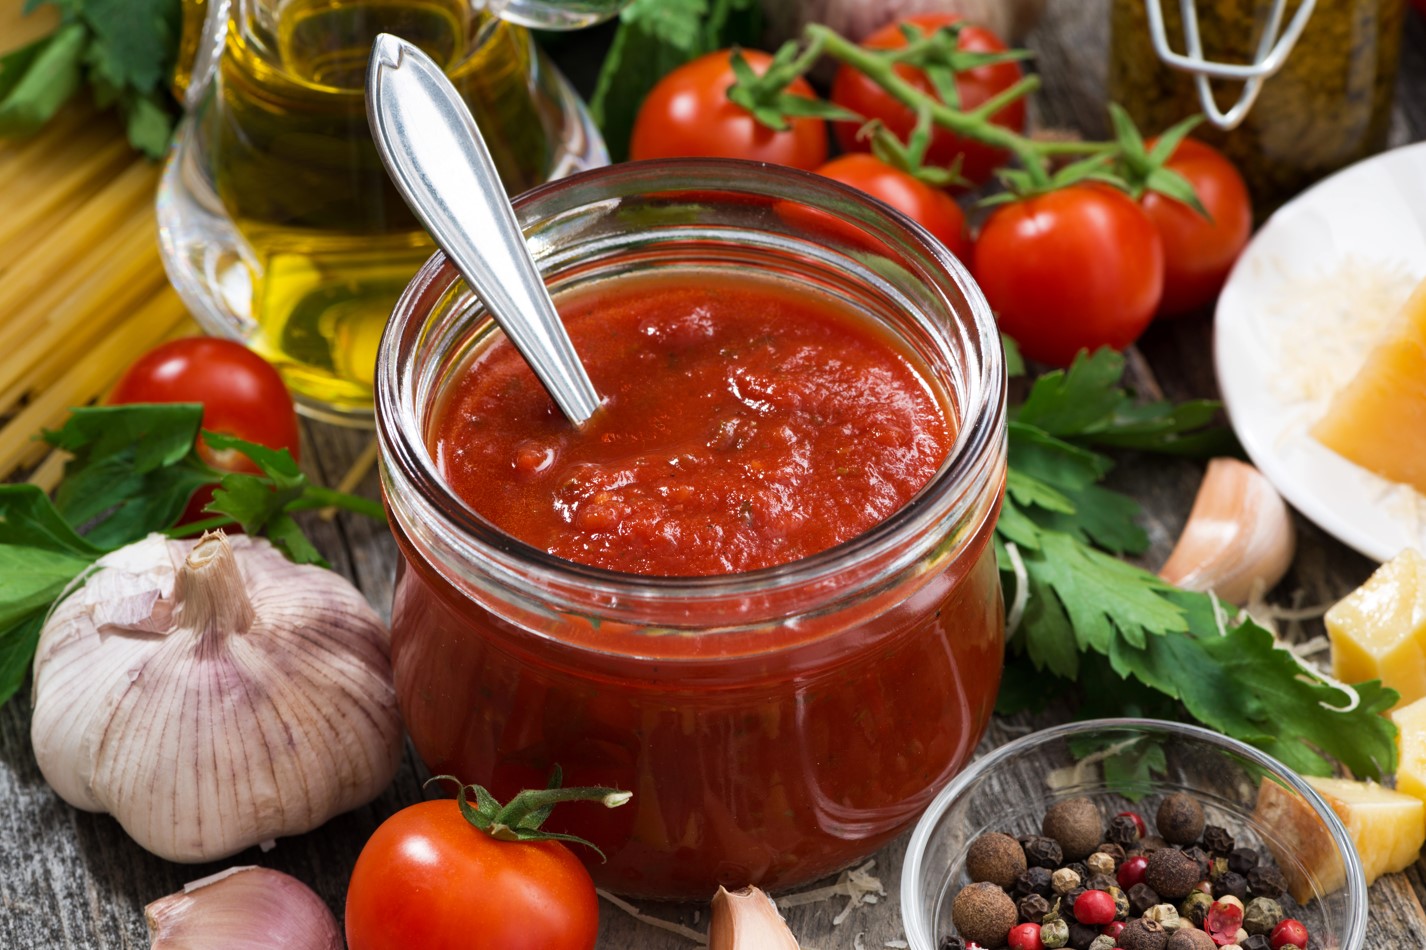 Tomato sauce and other delicacies for which you need a squeezer